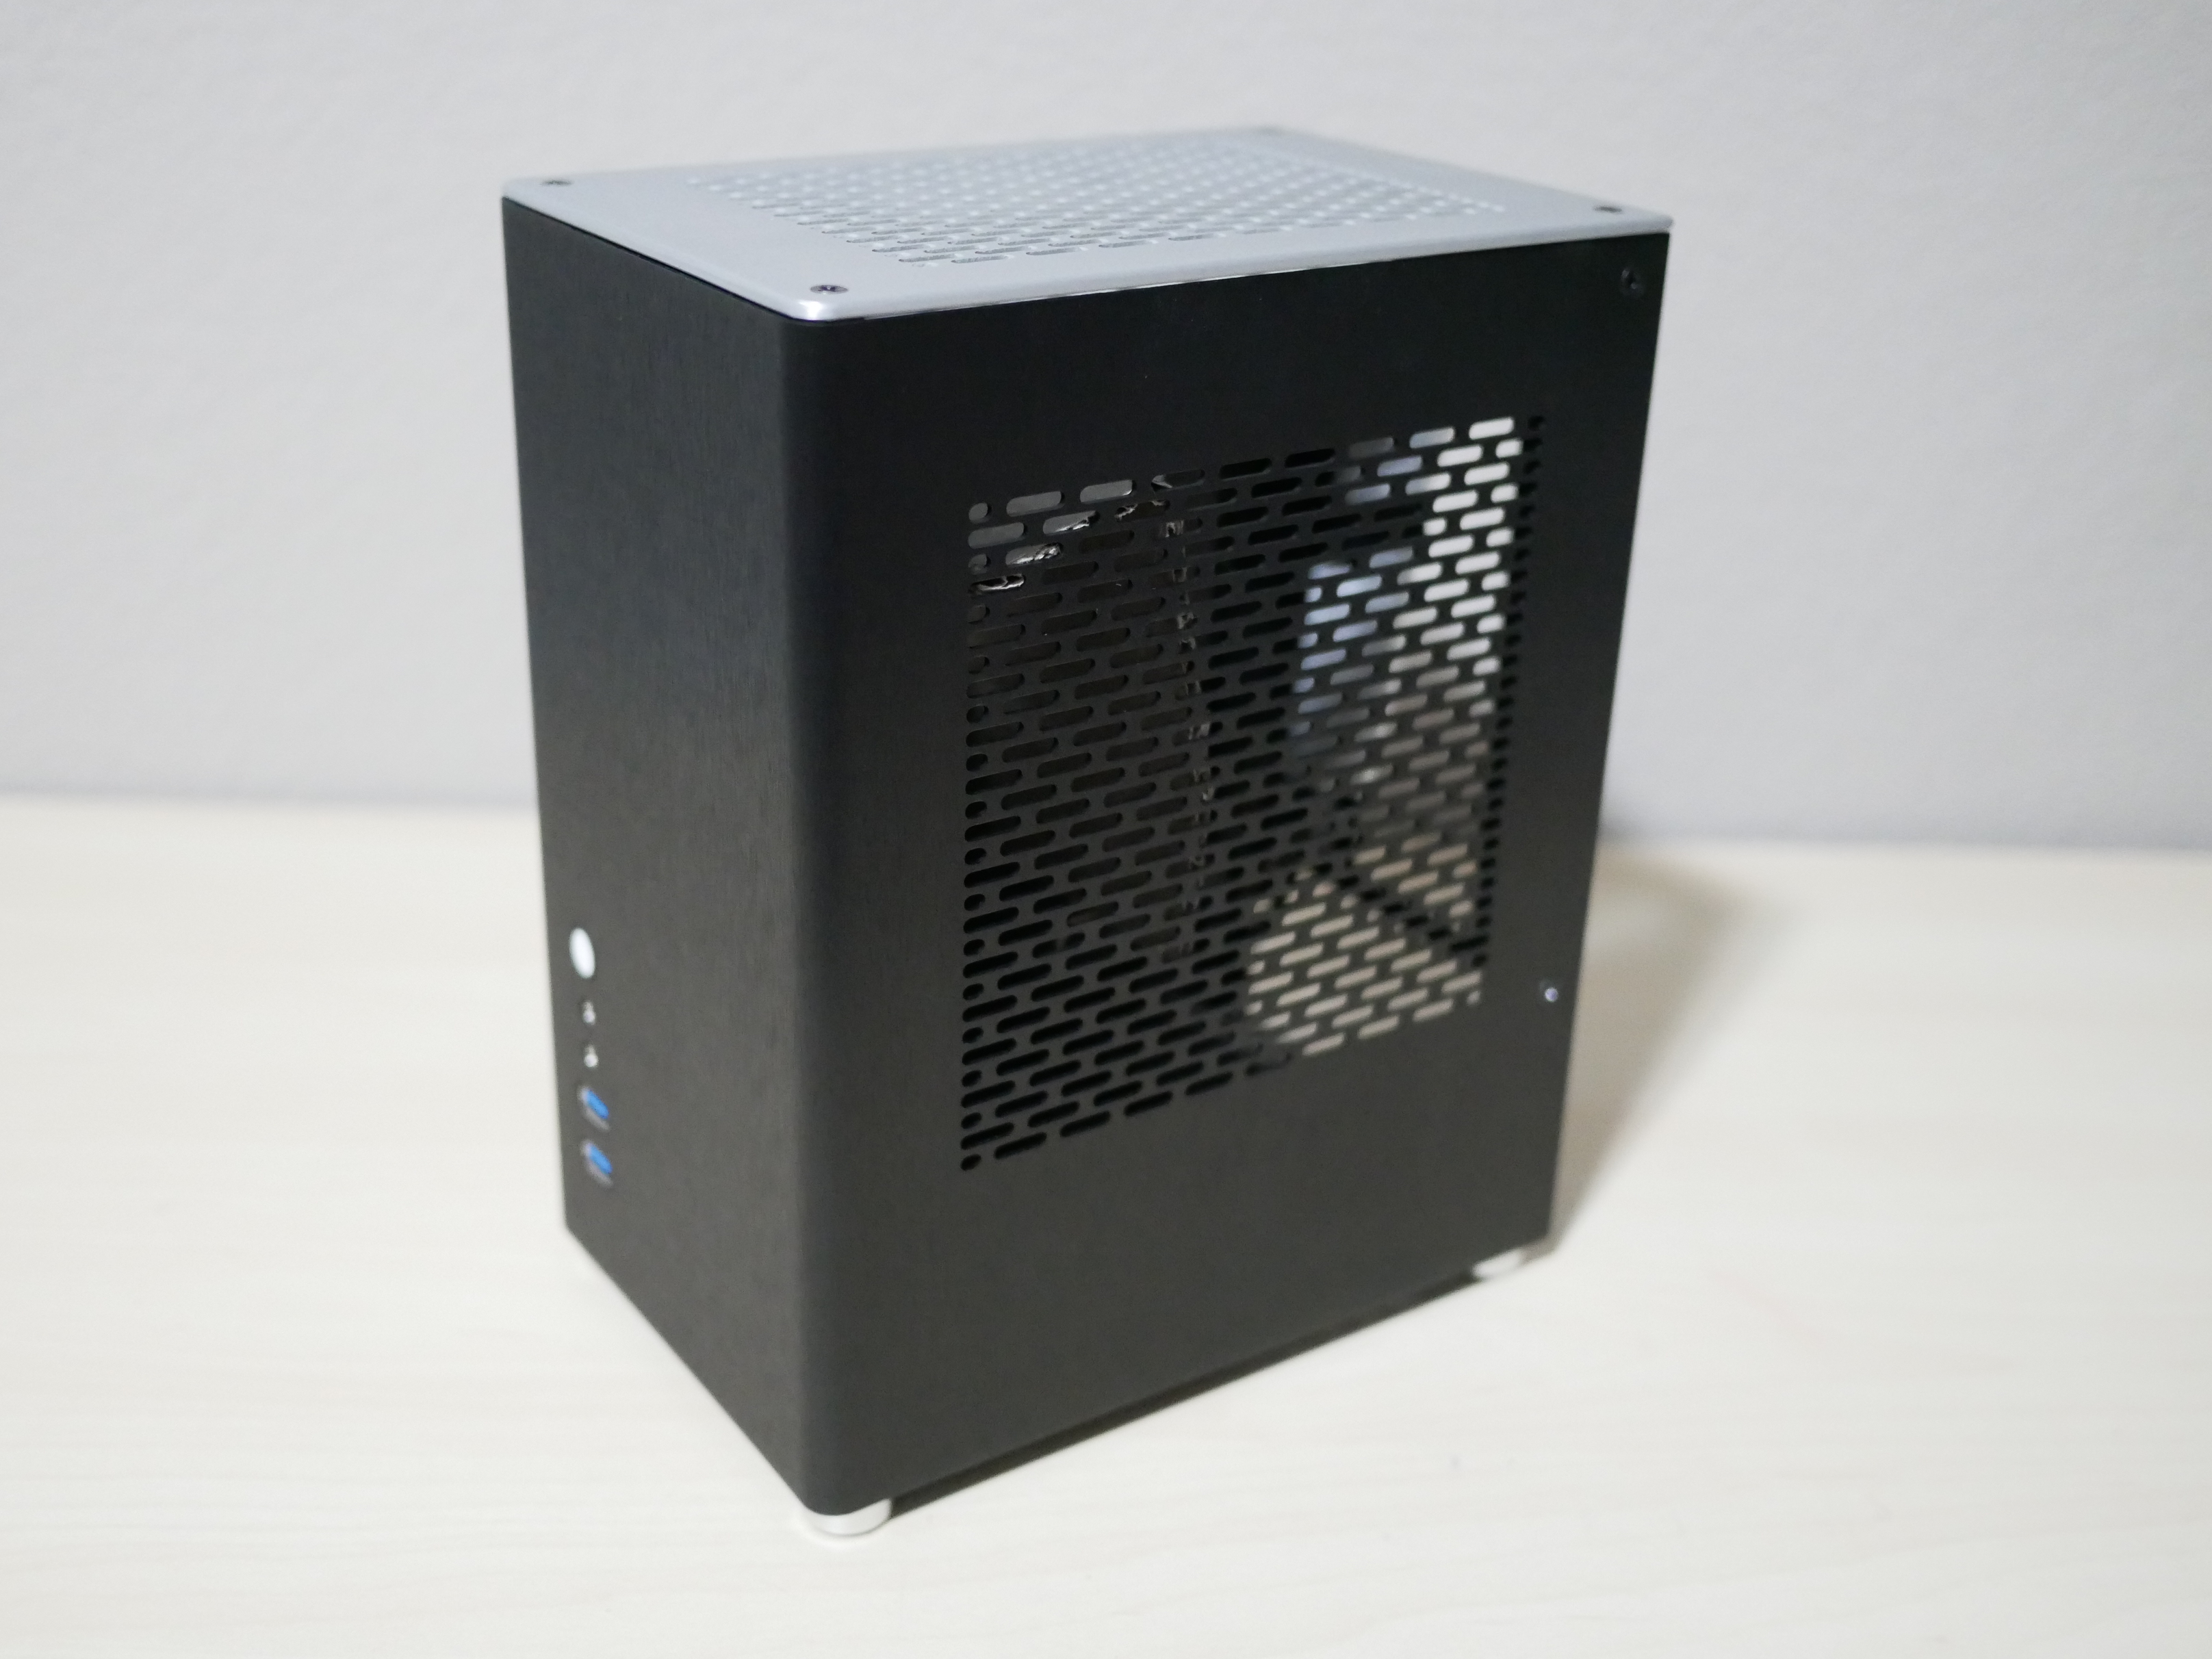 fordom Fradrage amme CCD MI-6 ITX Case Review: Small But Roomy